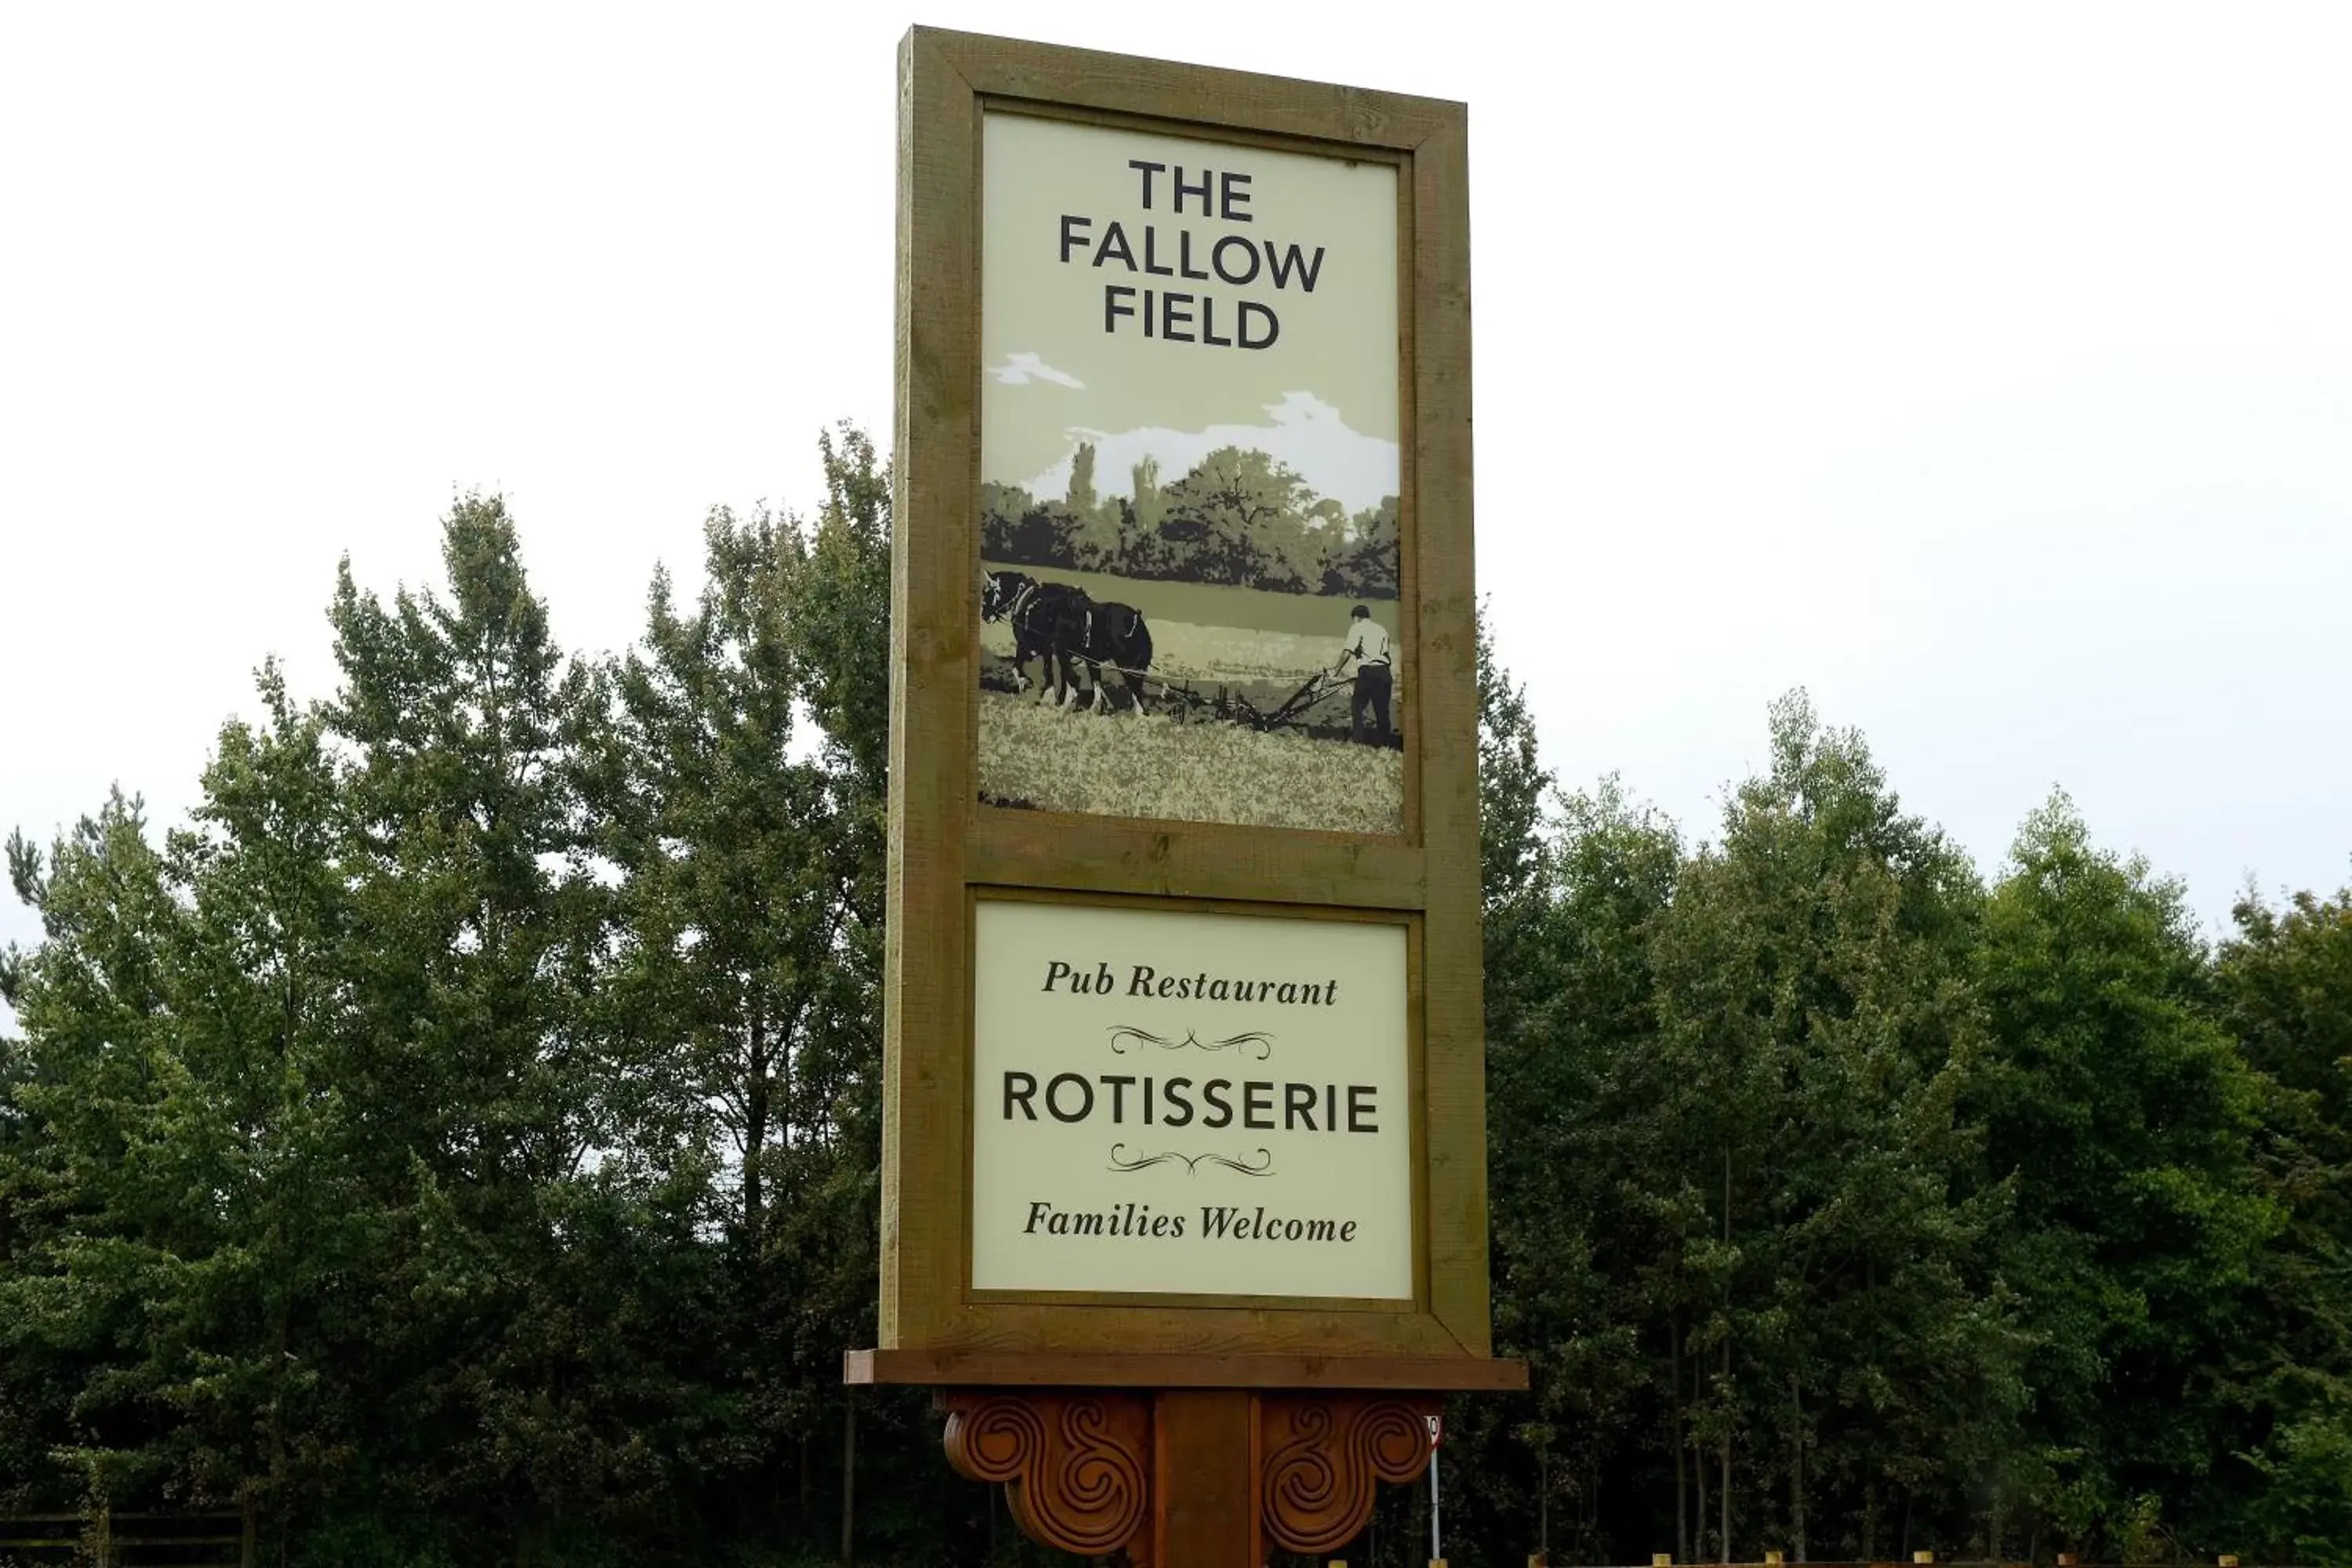 Property logo or sign in Fallow Field, Telford by Marston's Inns